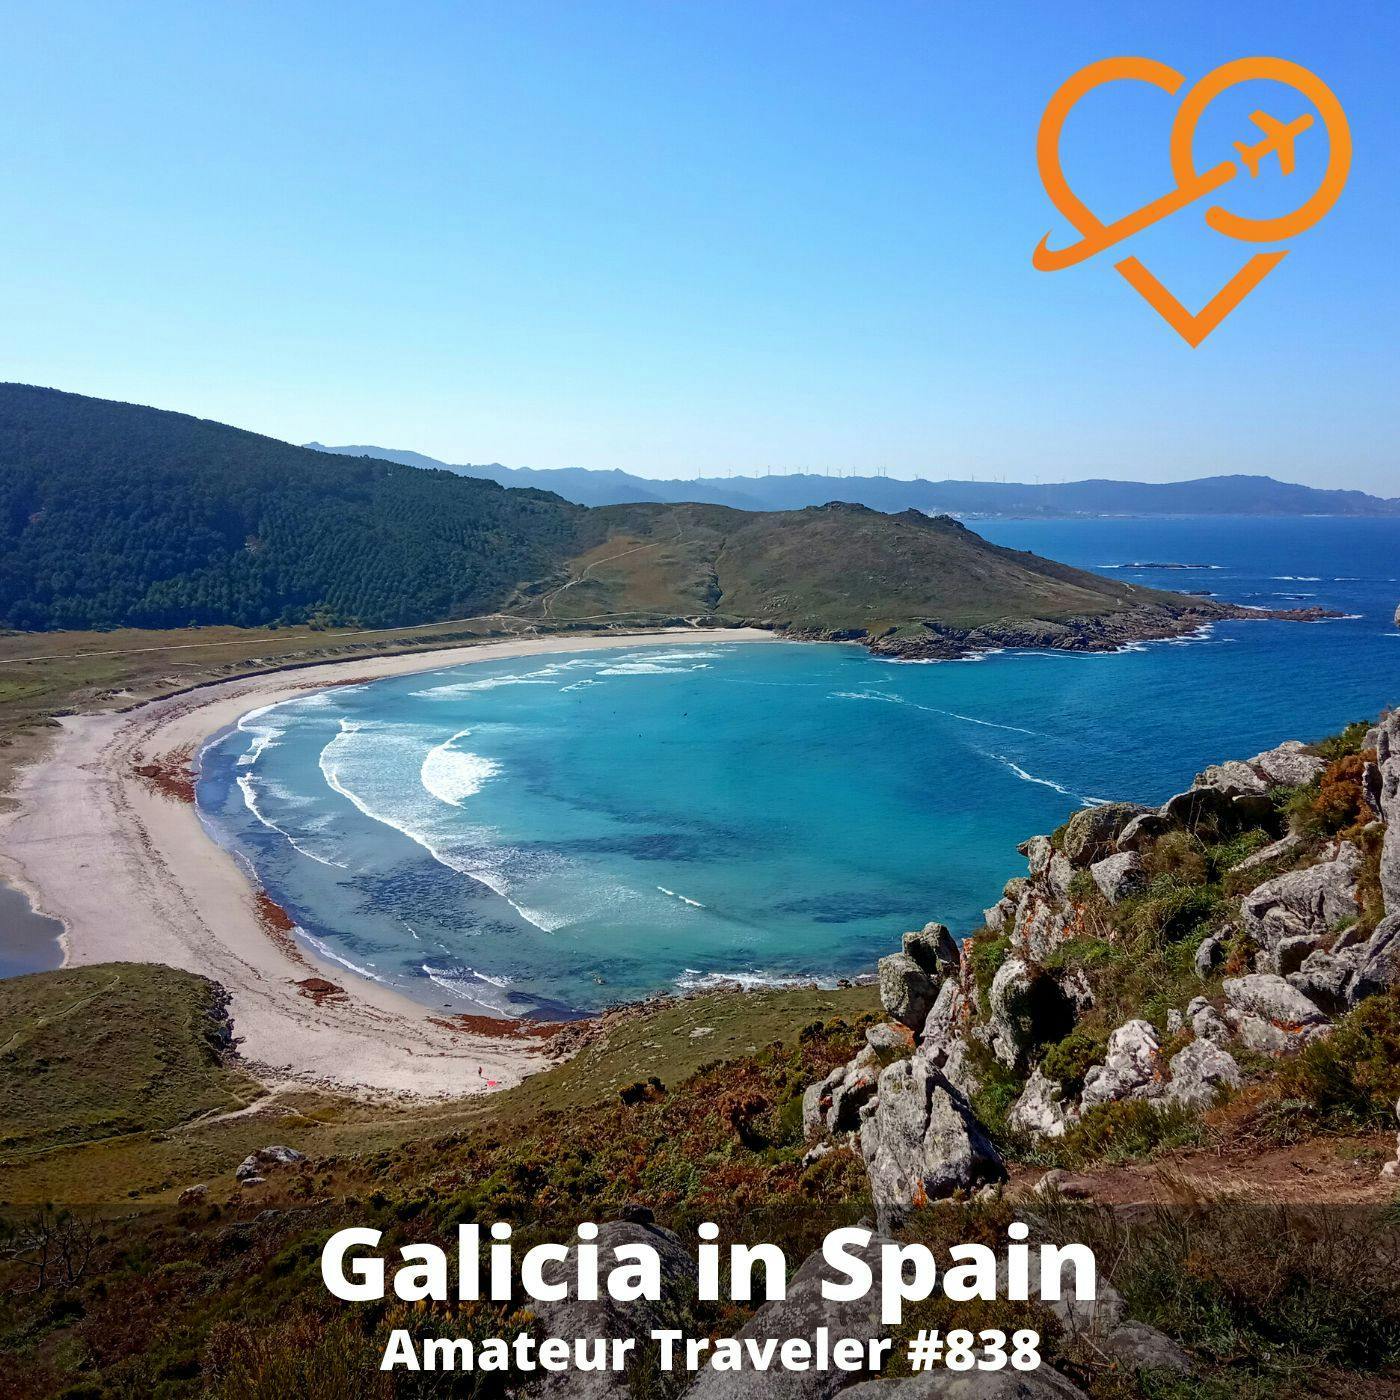 AT#838 - Travel to Galicia in Spain